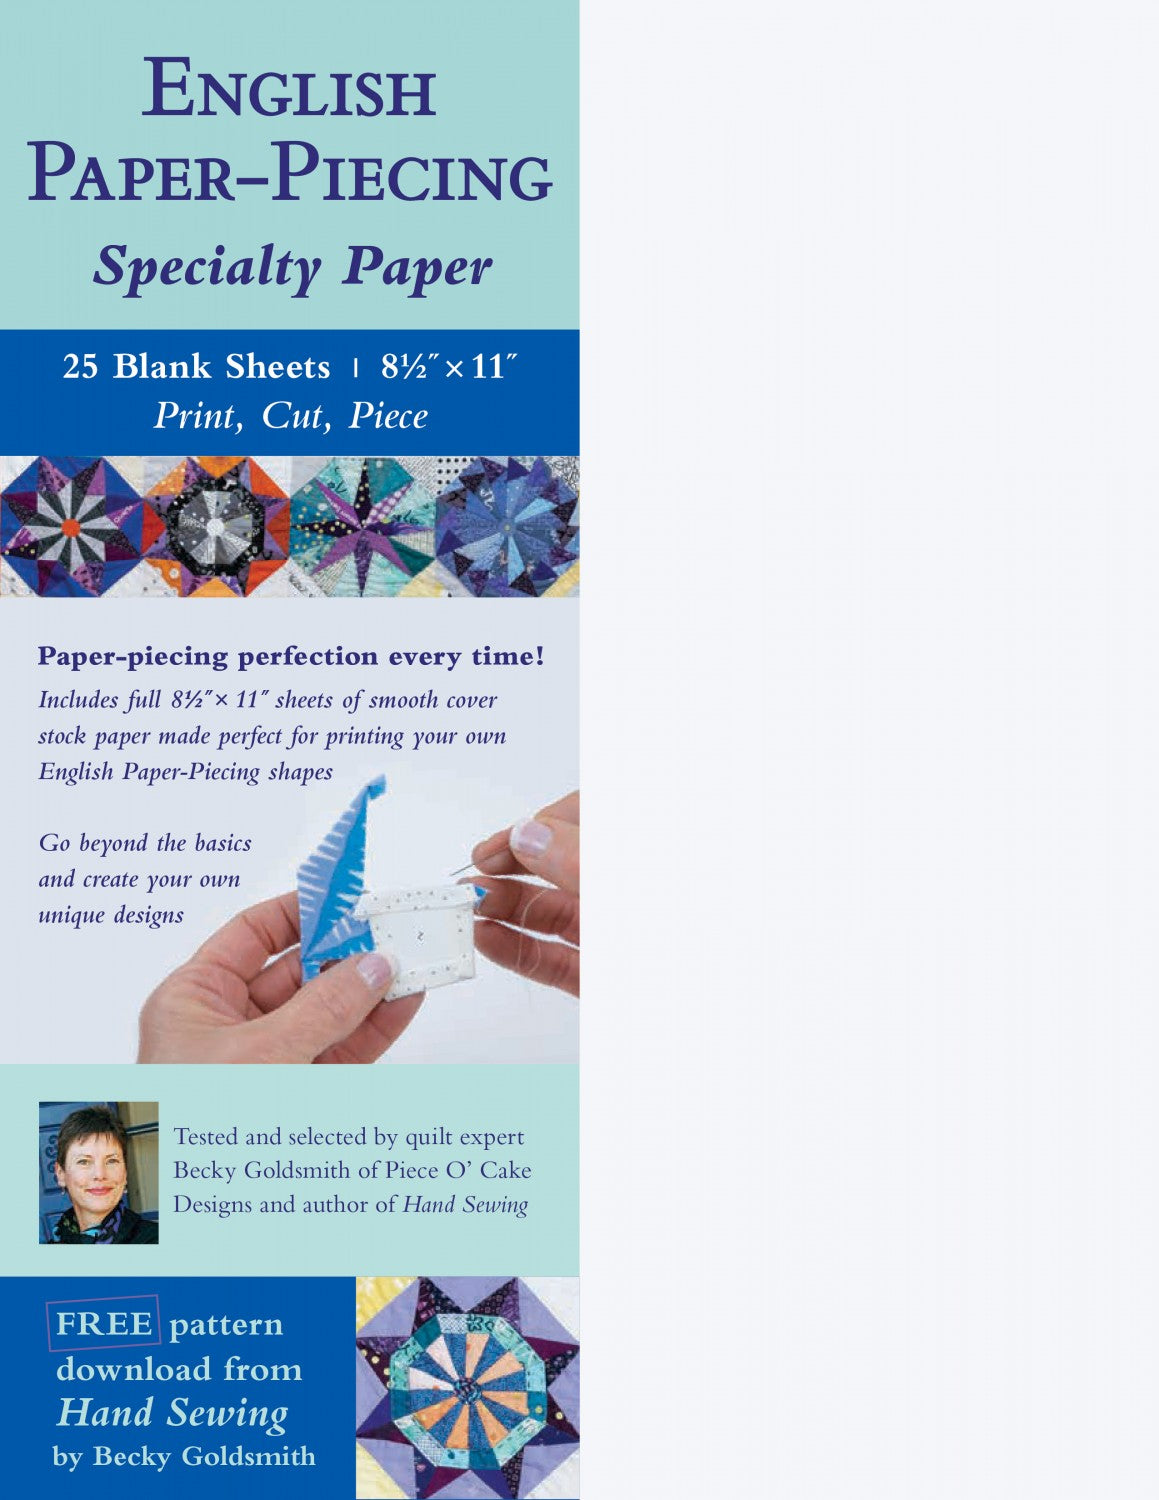 English Paper-Piecing Specialty Paper - C & T Publishing